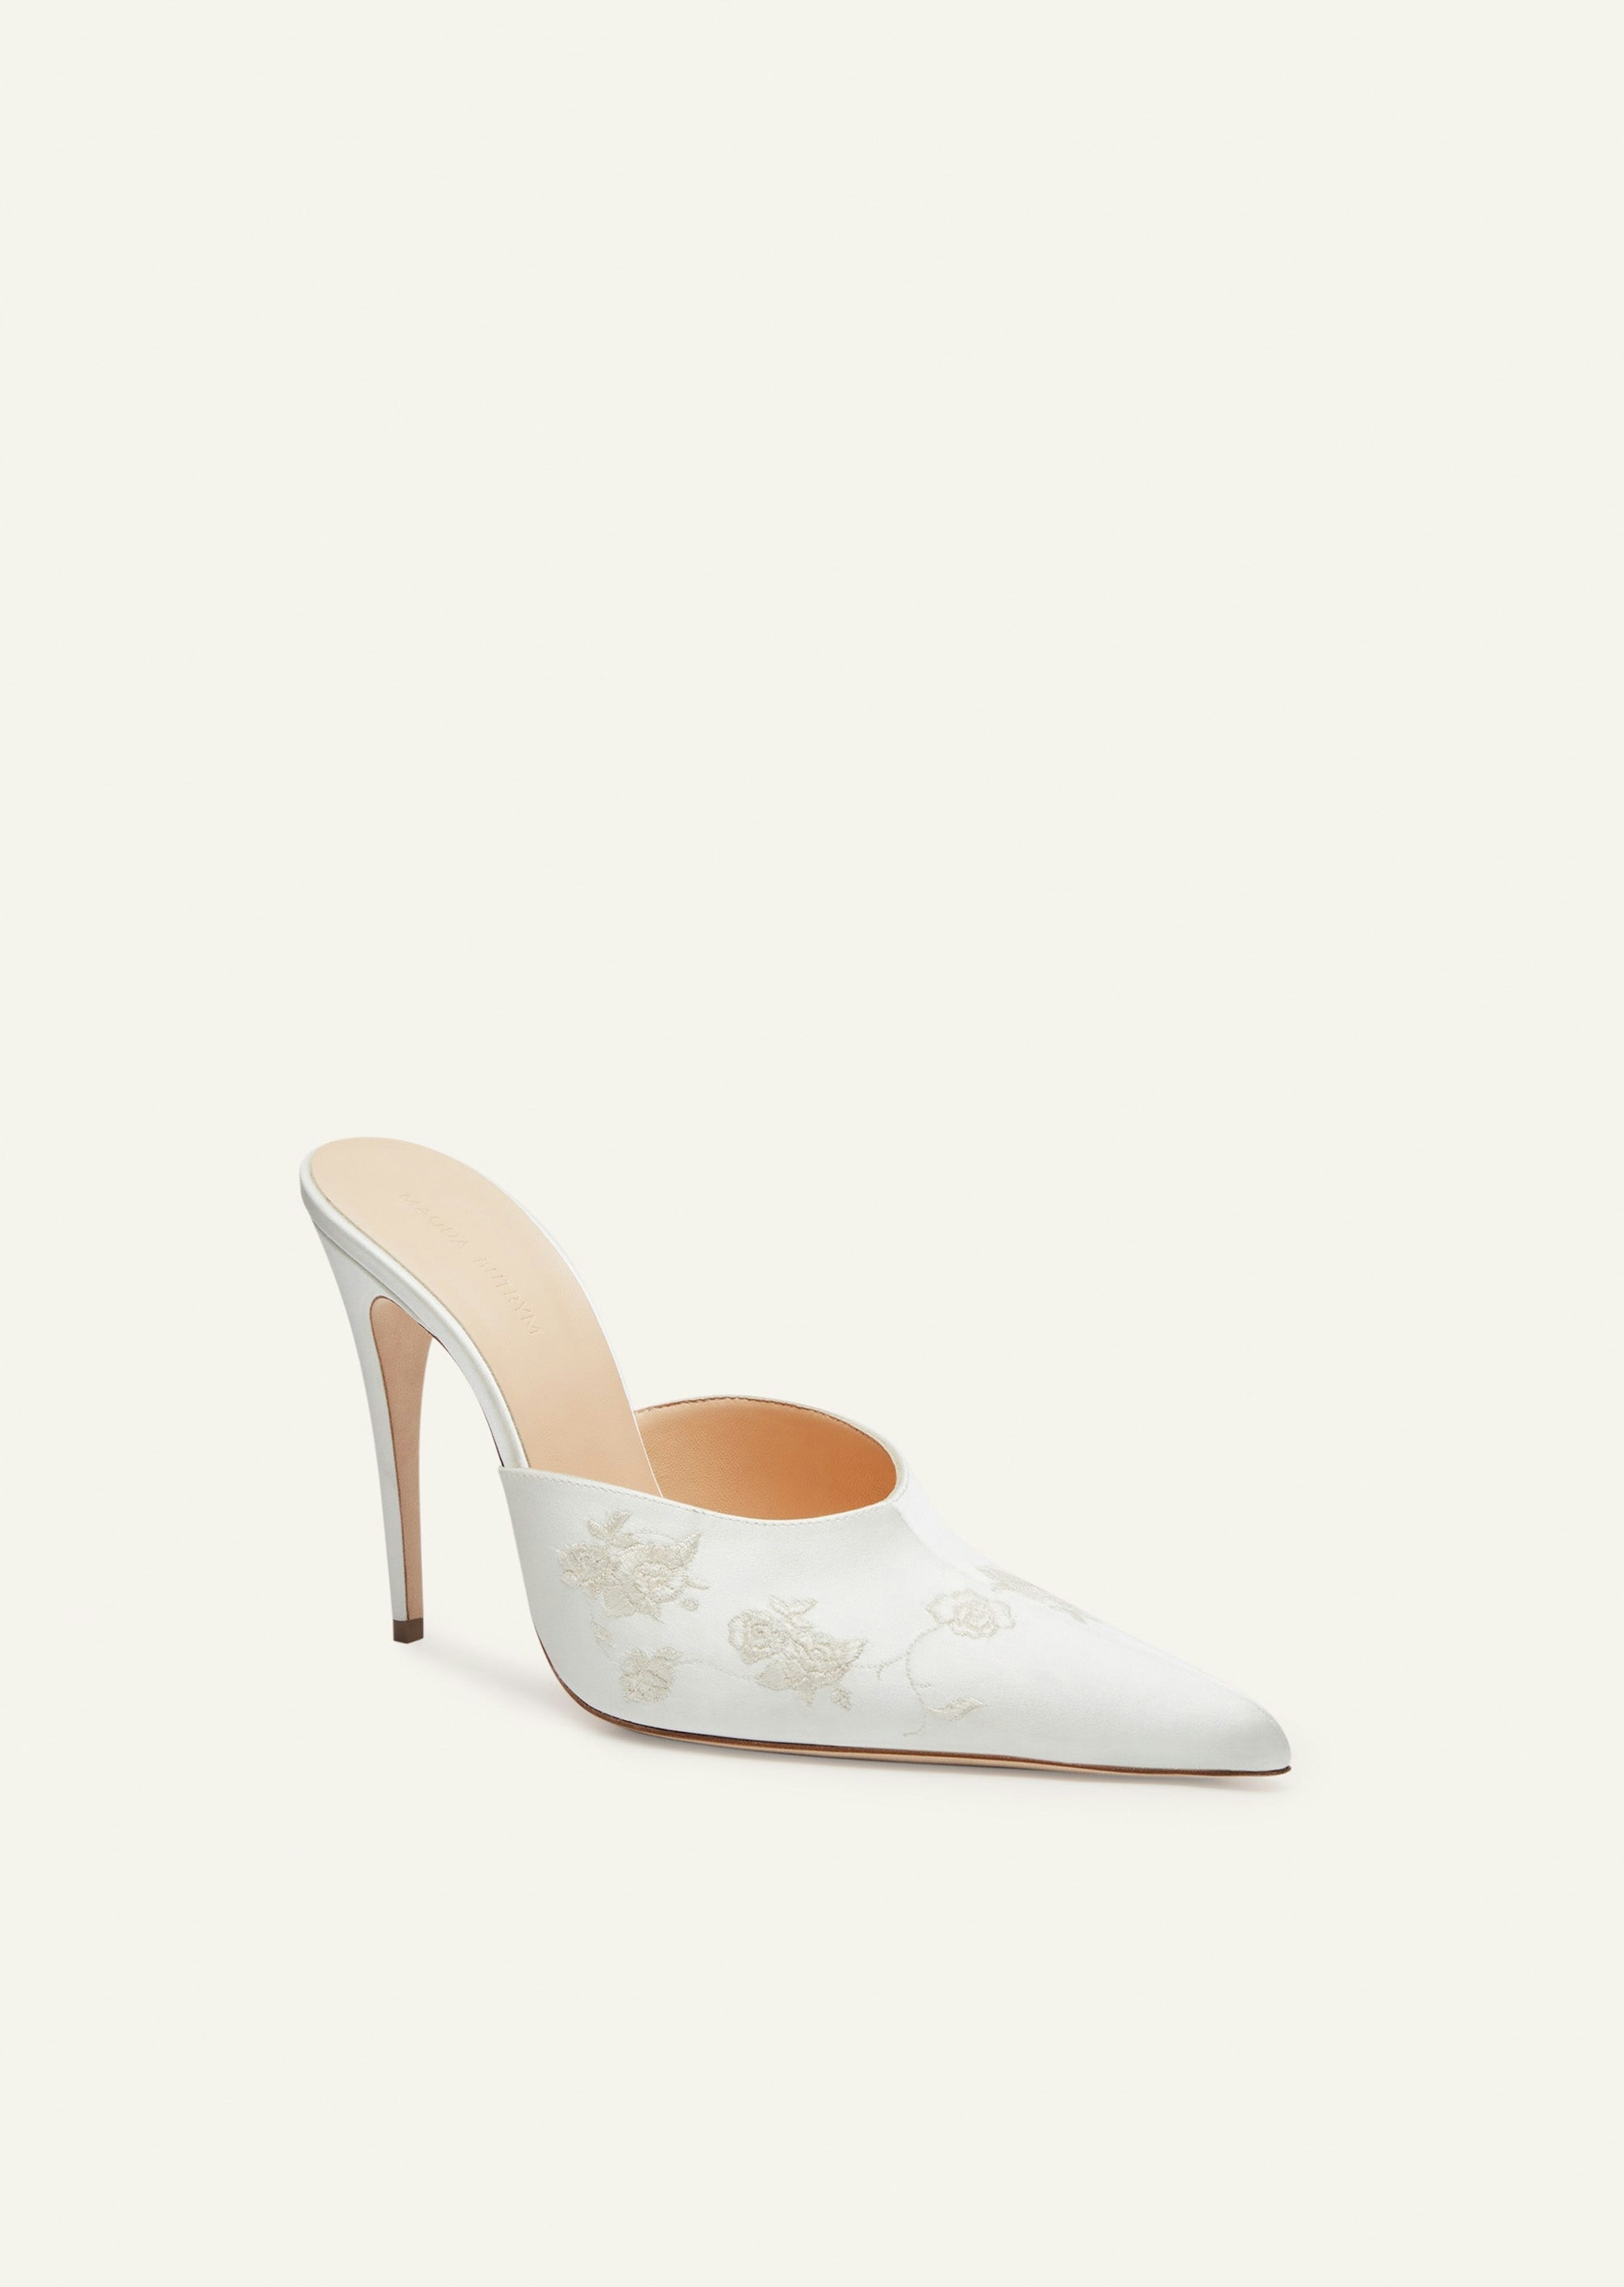 AW23 HIGH MULES SATIN CREAM EMBROIDERY